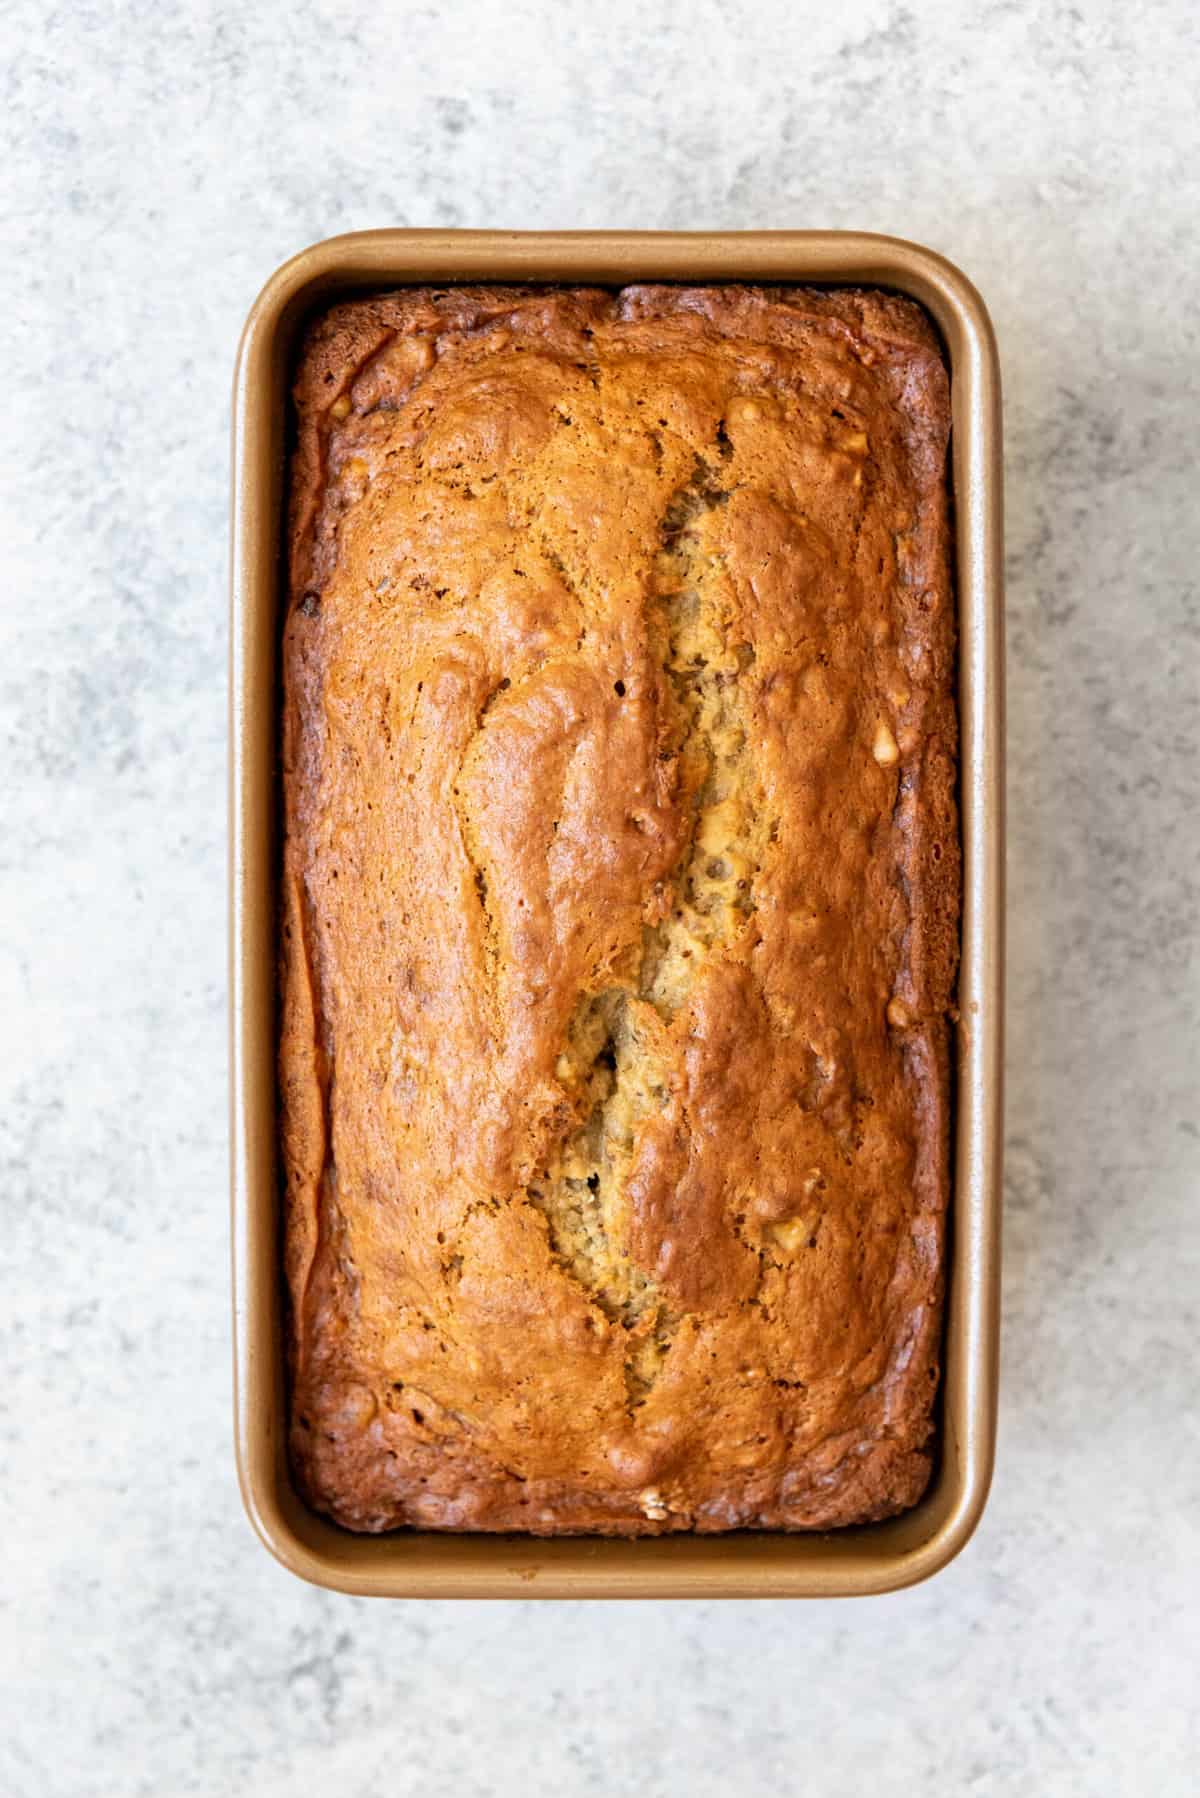 An image of fresh baked banana bread in a loaf pan.